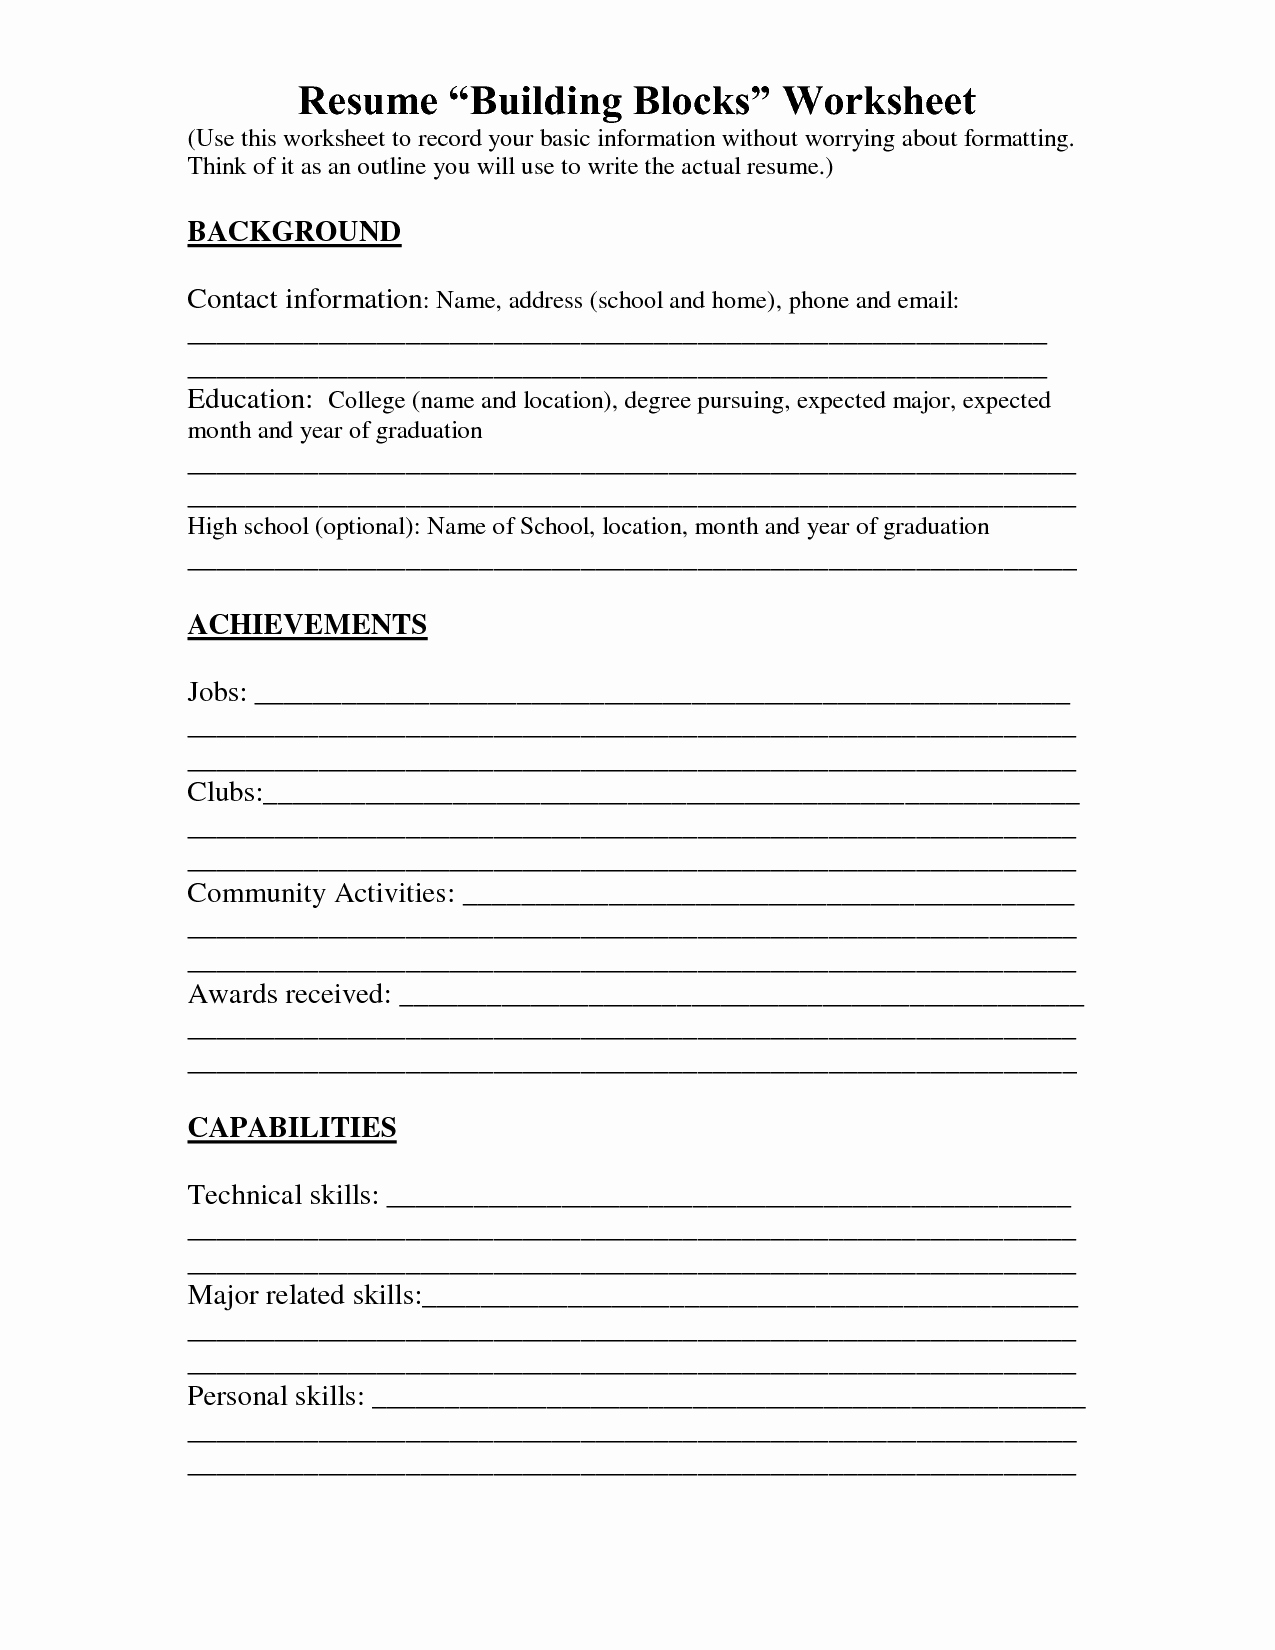 Resume Worksheet for Adults New 17 Best Of Creating A Resume Worksheet Fill In